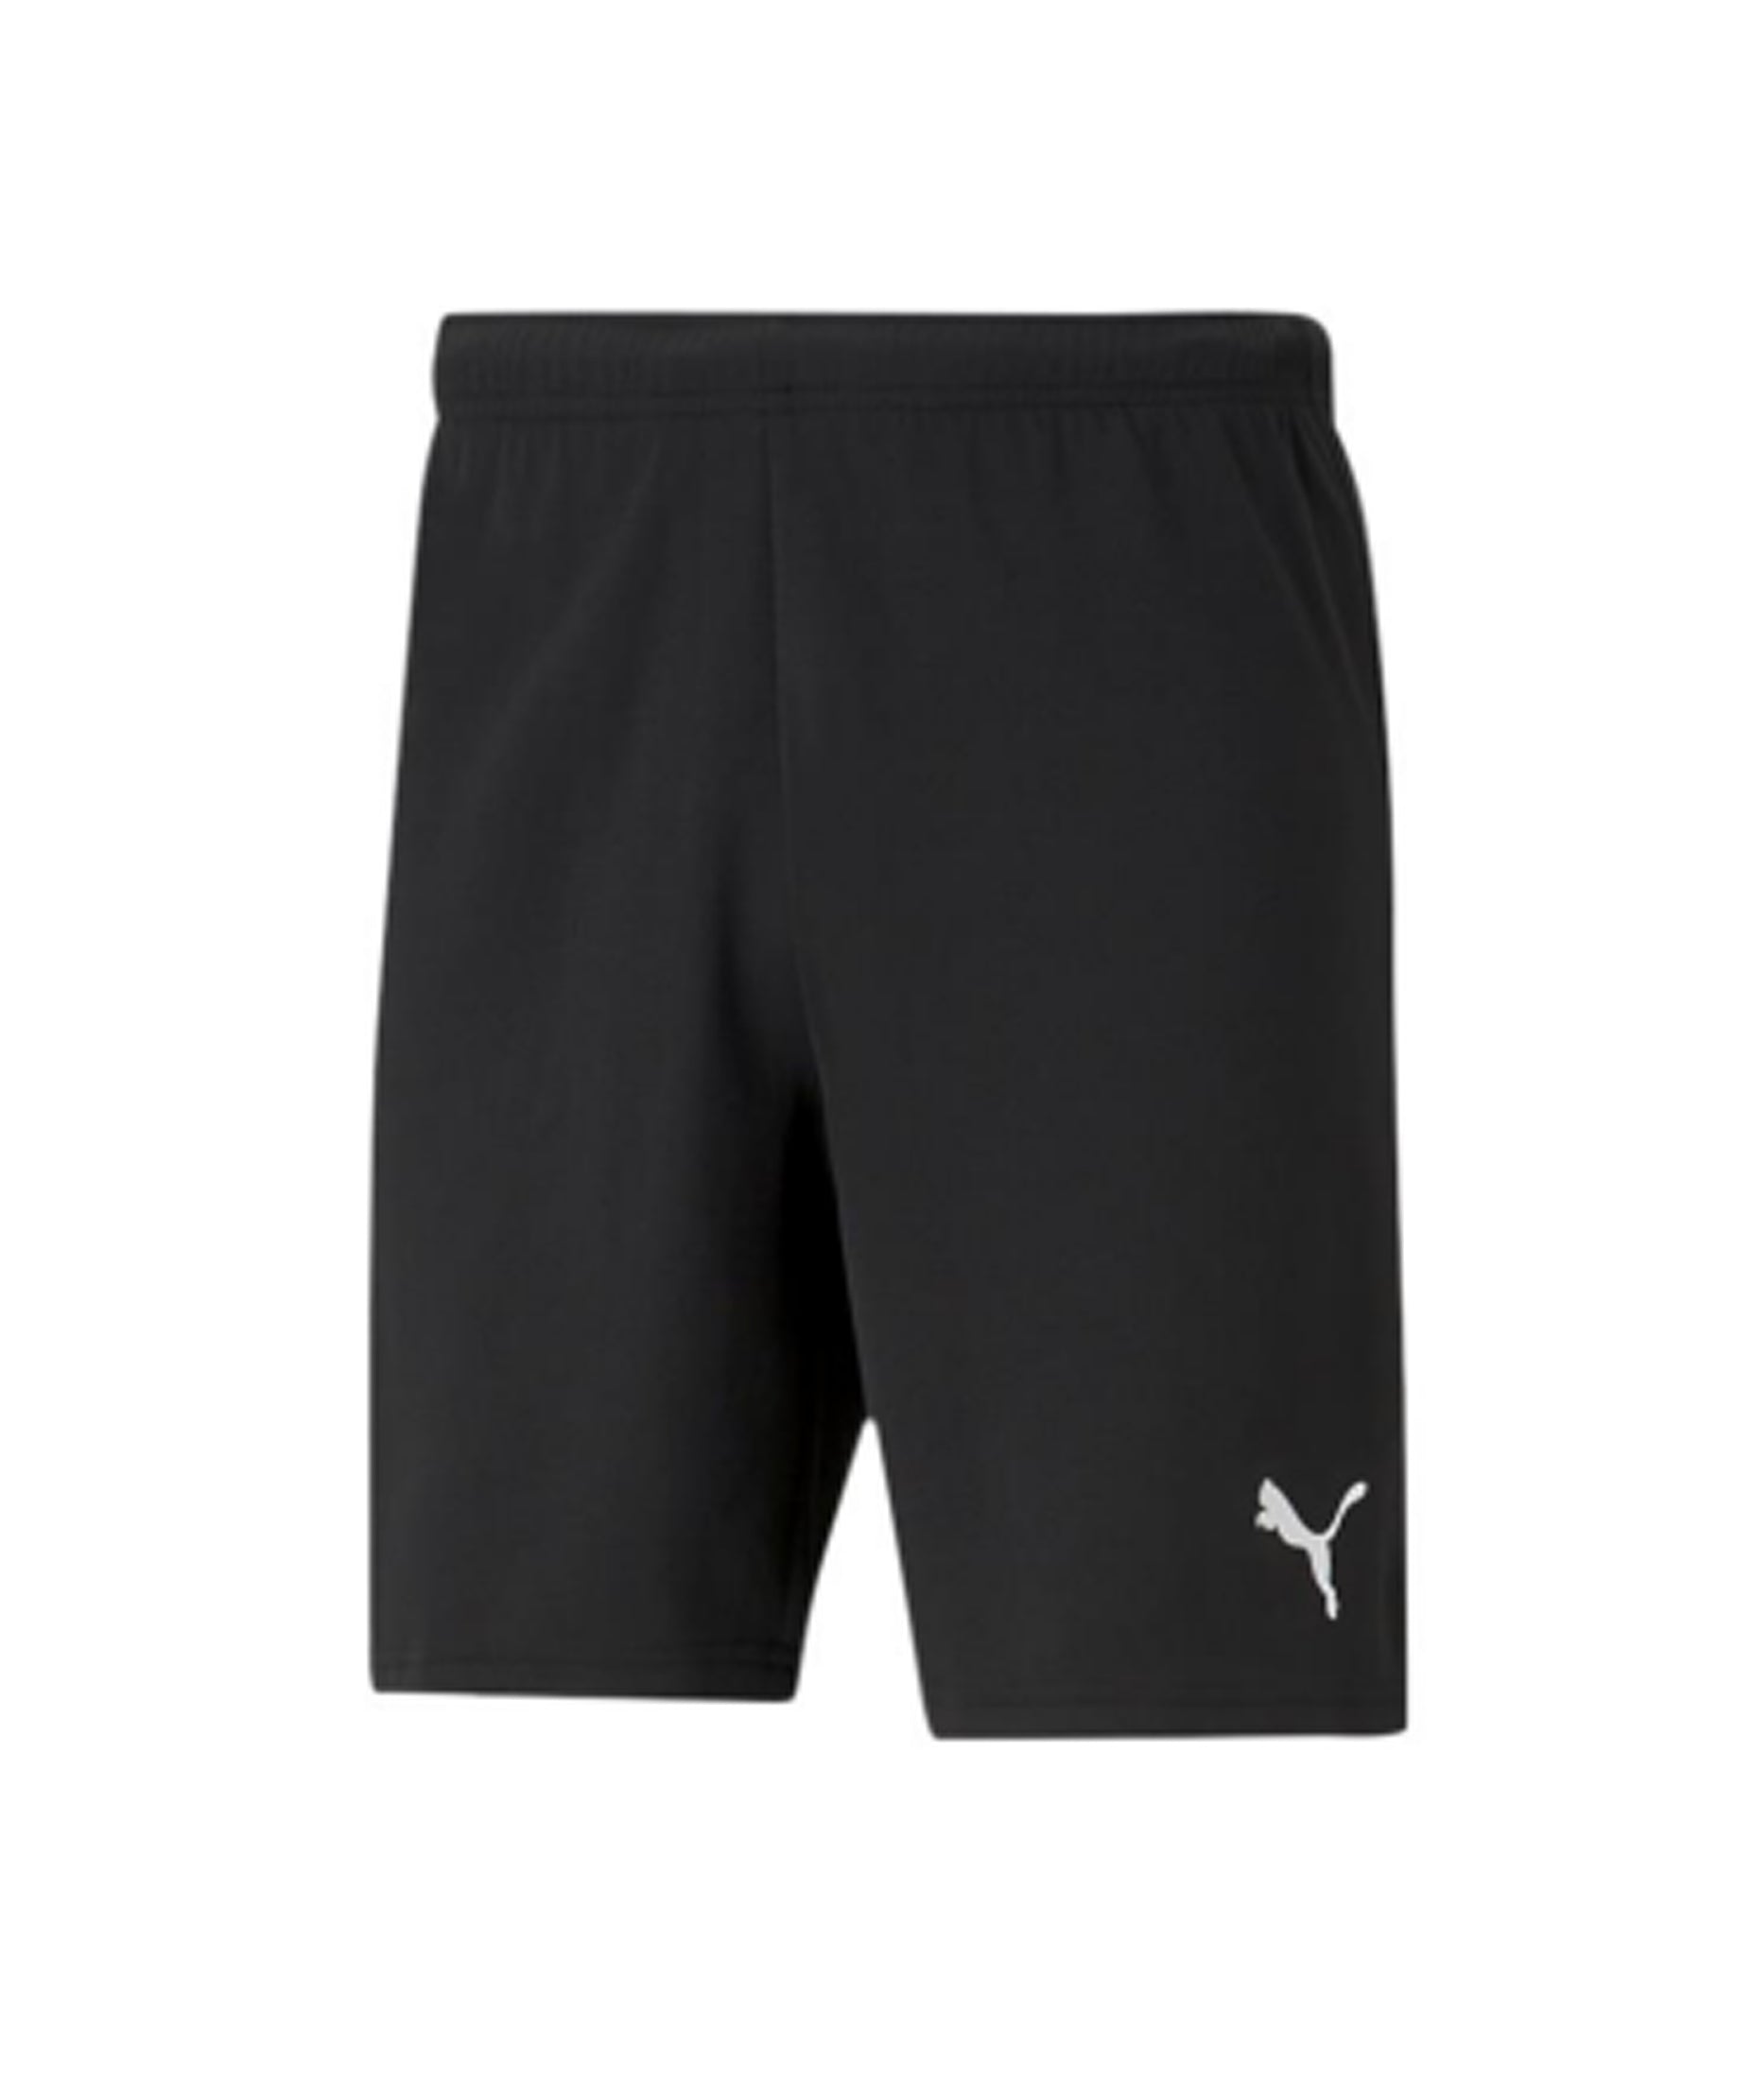 CLAREMONT STARS YOUTH AND ADULT PRACTICE SHORTS - PUMA TEAM RISE